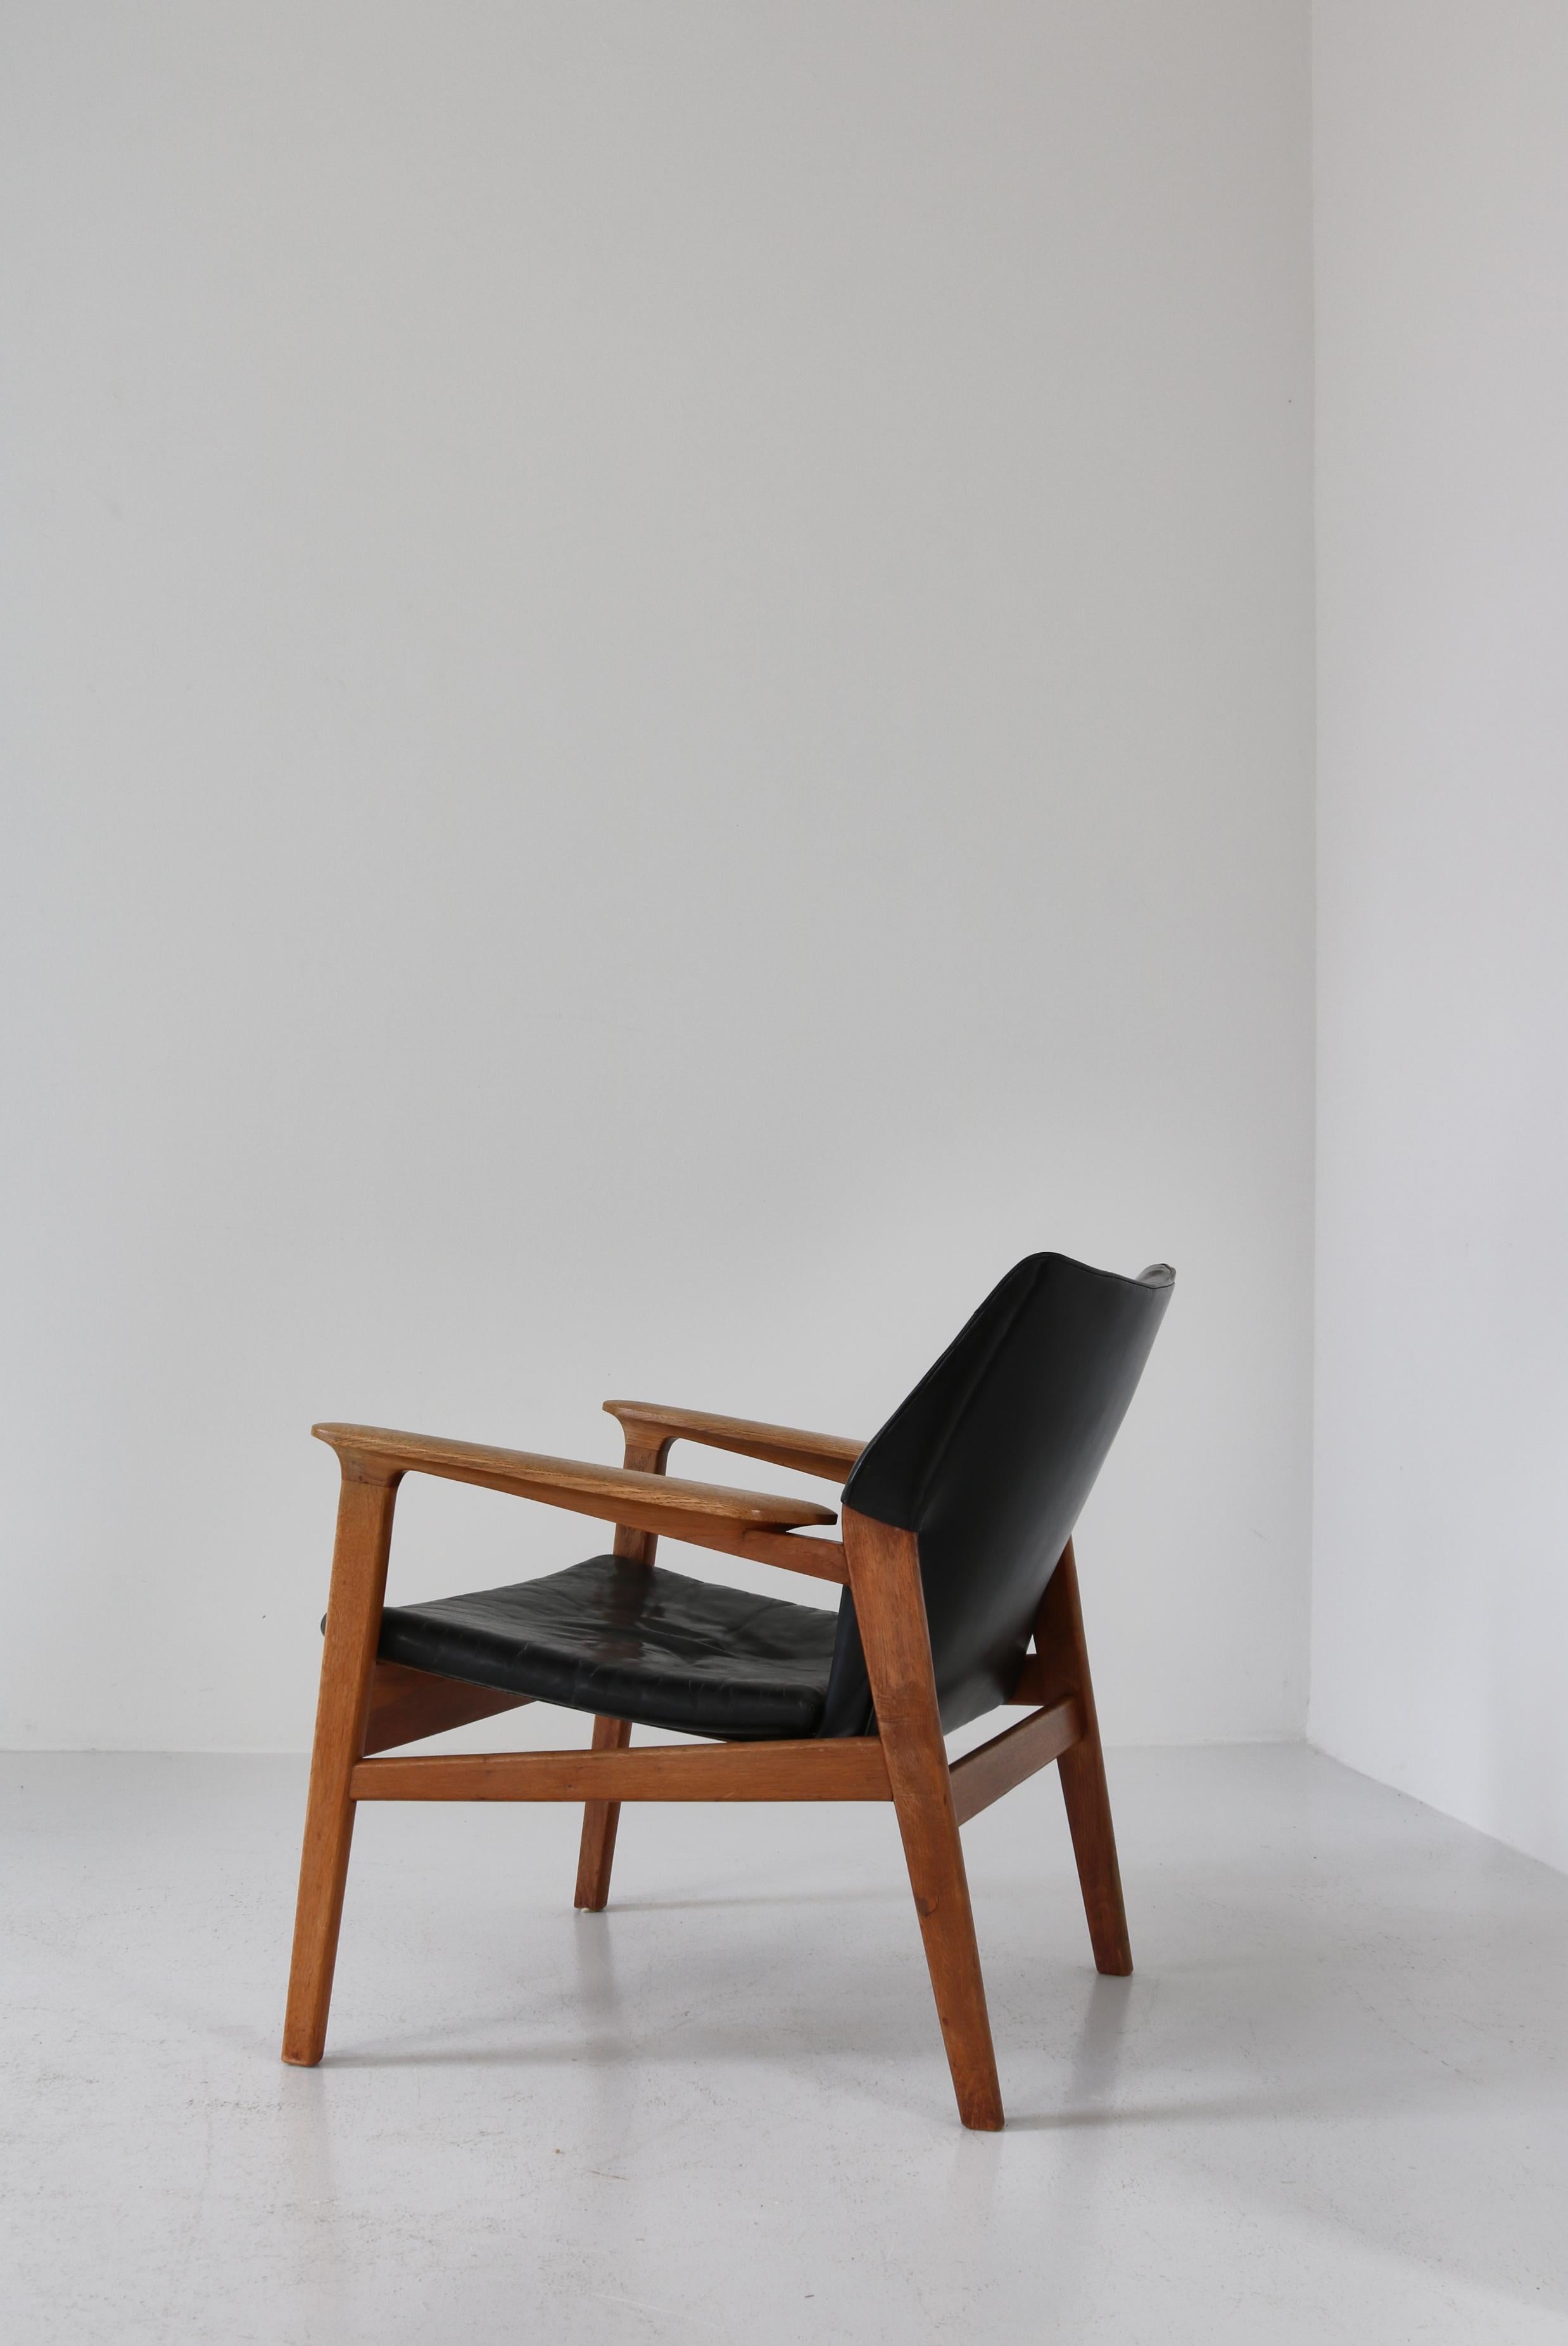 Danish Modern Lounge Chair in Patinated Oak & Black Leather by Hans Olsen, 1950s For Sale 9